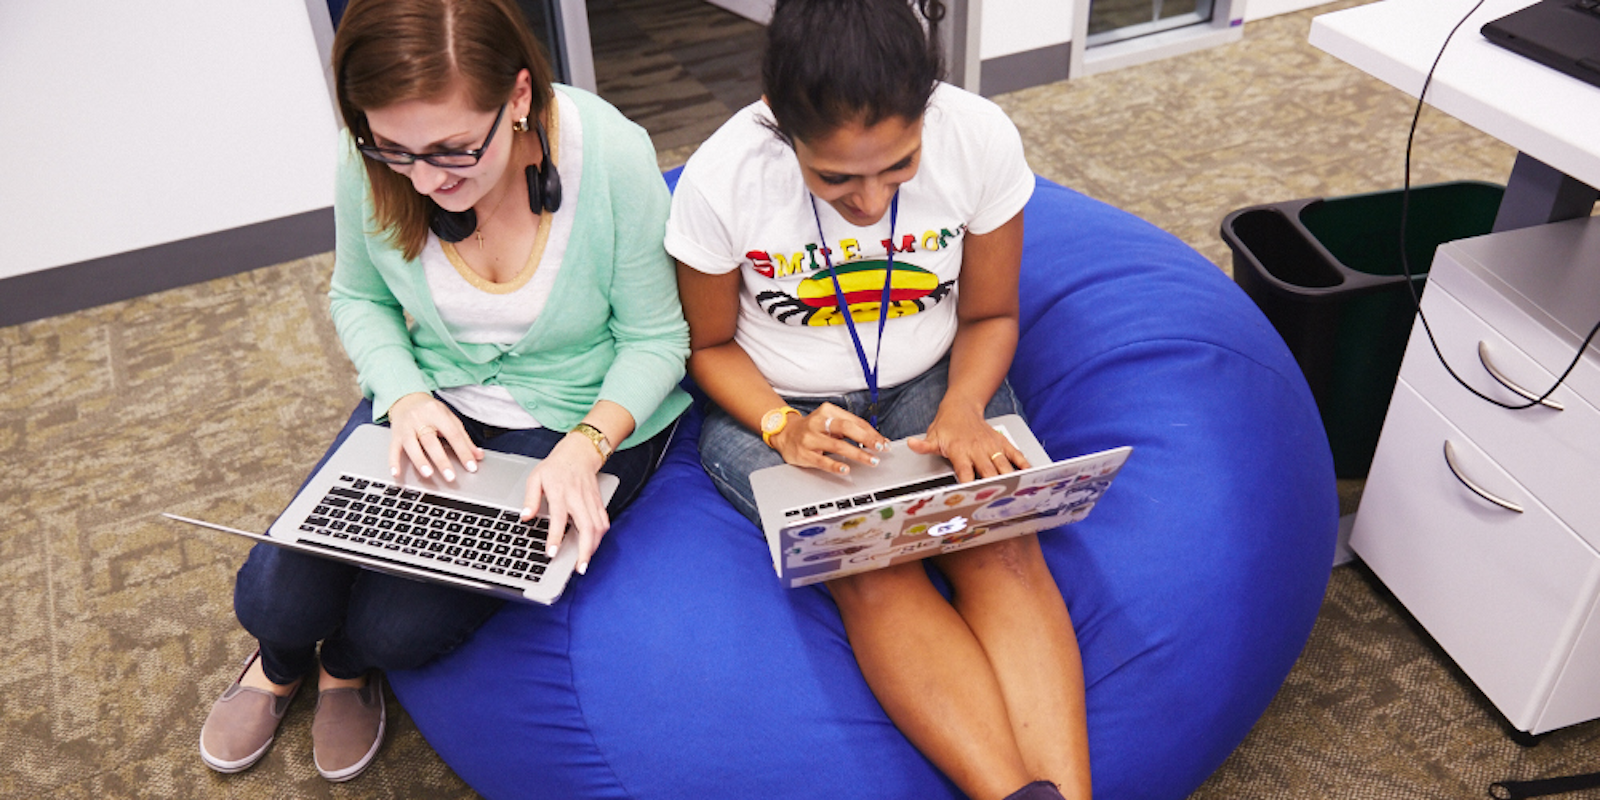 Googlers at work, two women working on laptops on a beanbag chair